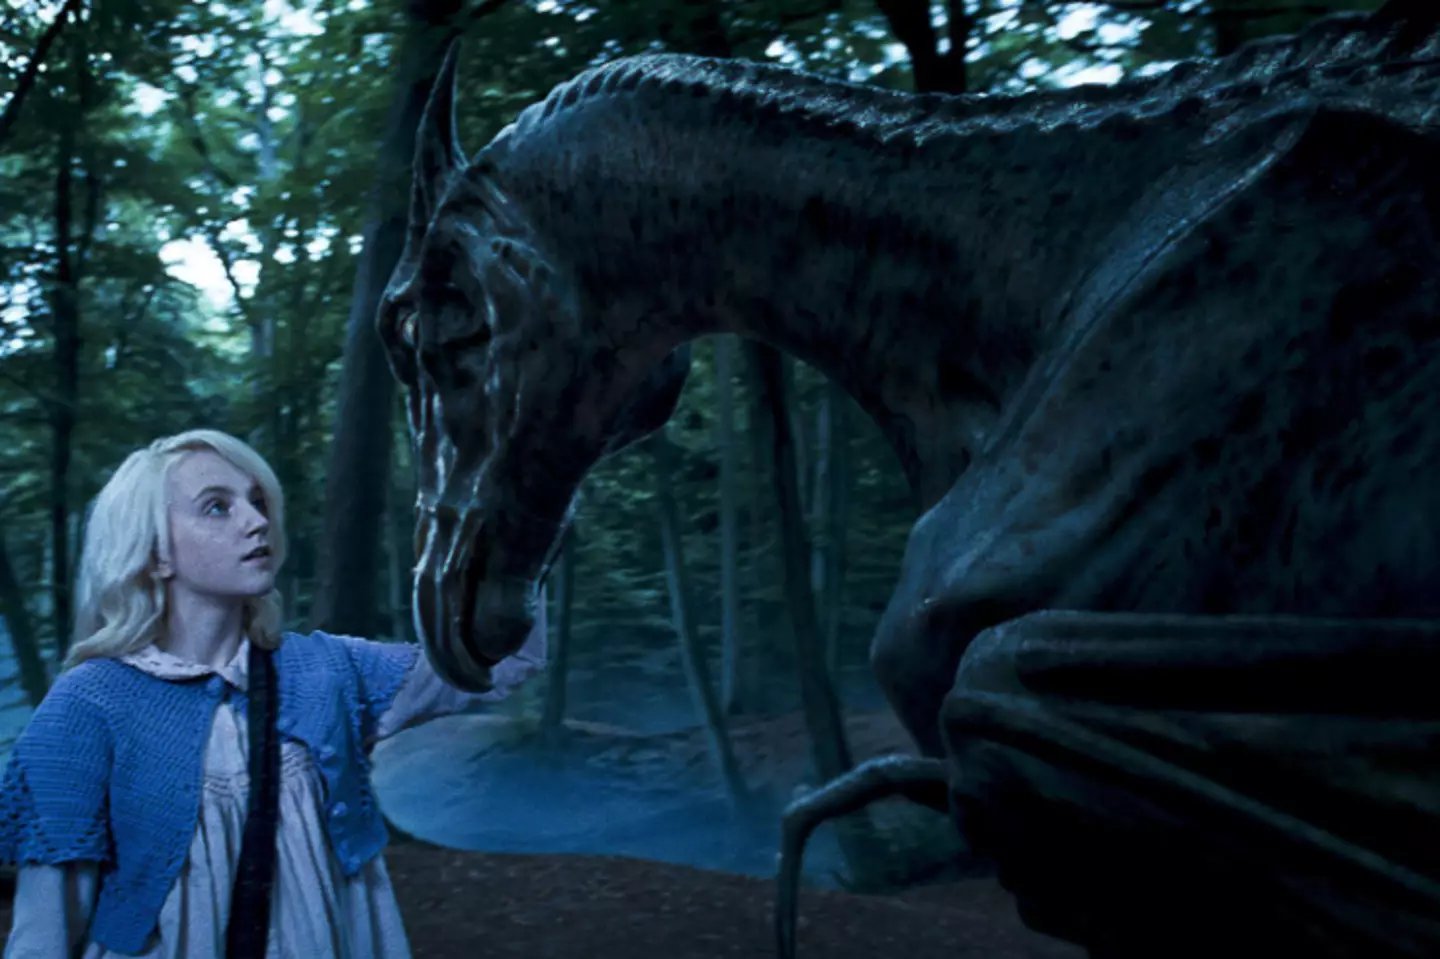 Luna Lovegood introduced Harry Potter to Thestrals in the franchise.